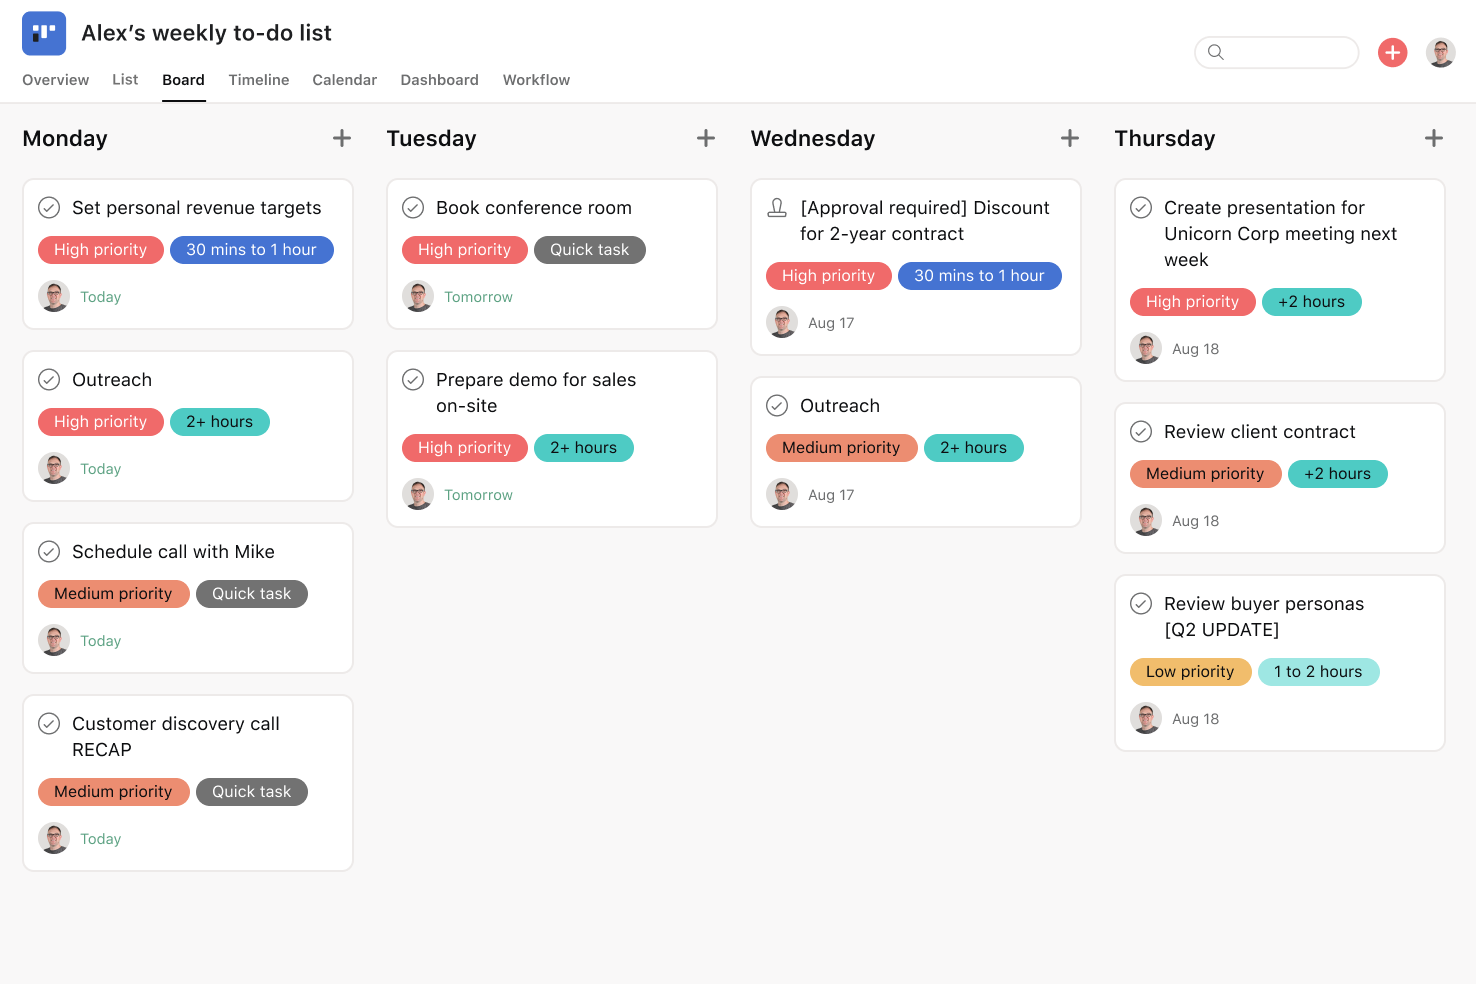 [Product ui] Weekly to-do list in Asana, Kanban board style view (Boards)